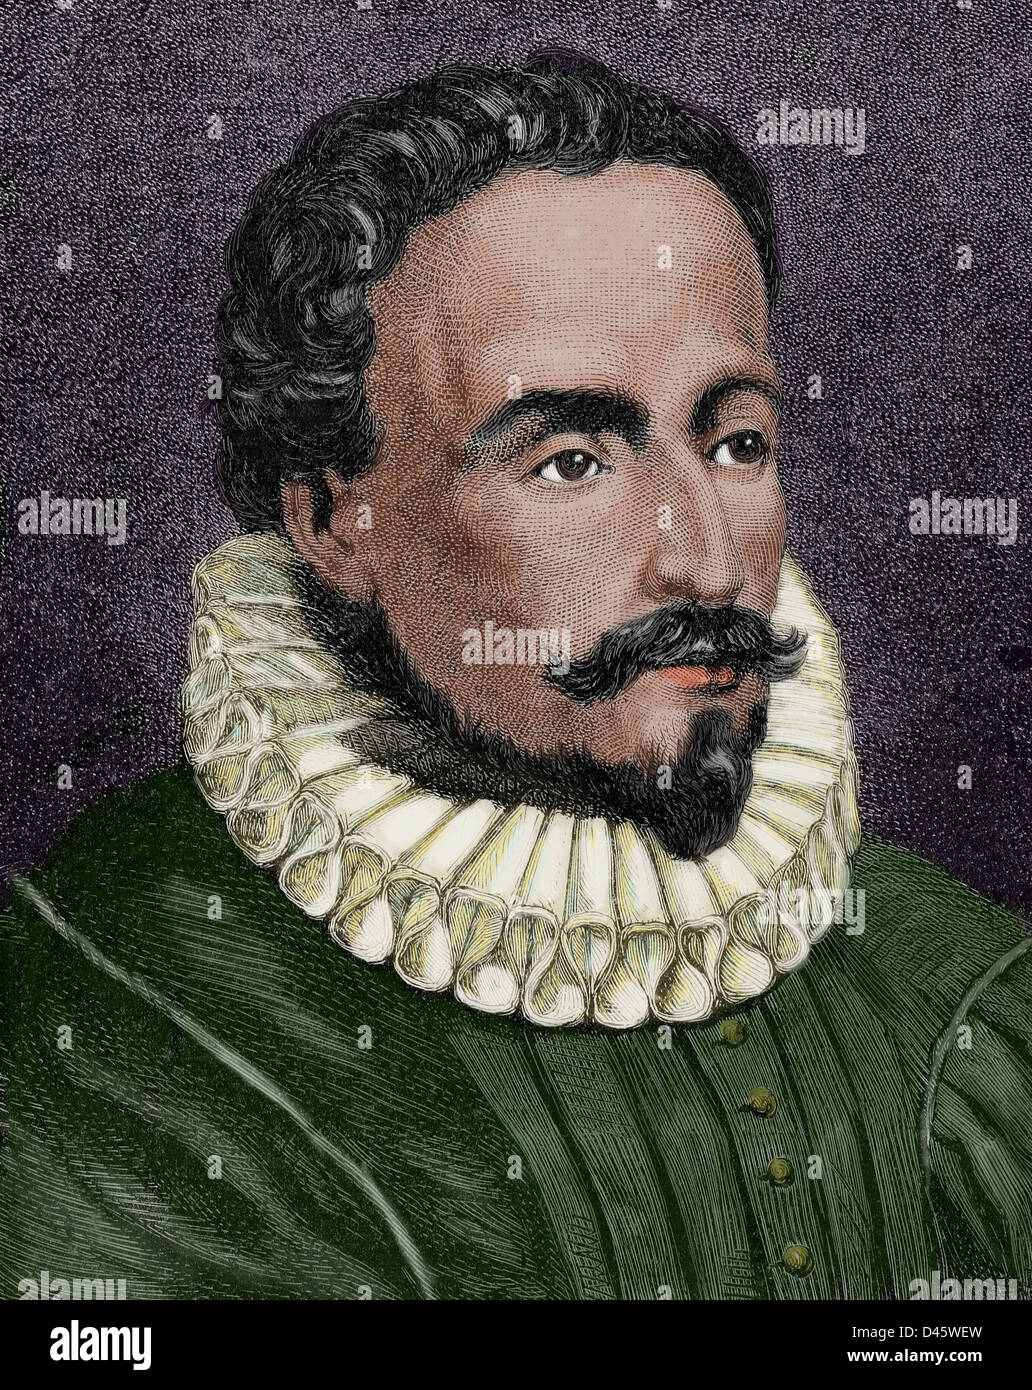 Miguel de Cervantes (1547-1616). Spanish writer. Engraving by Capuz in The Spanish and American Illustration, 1872. Colored. Stock Photo